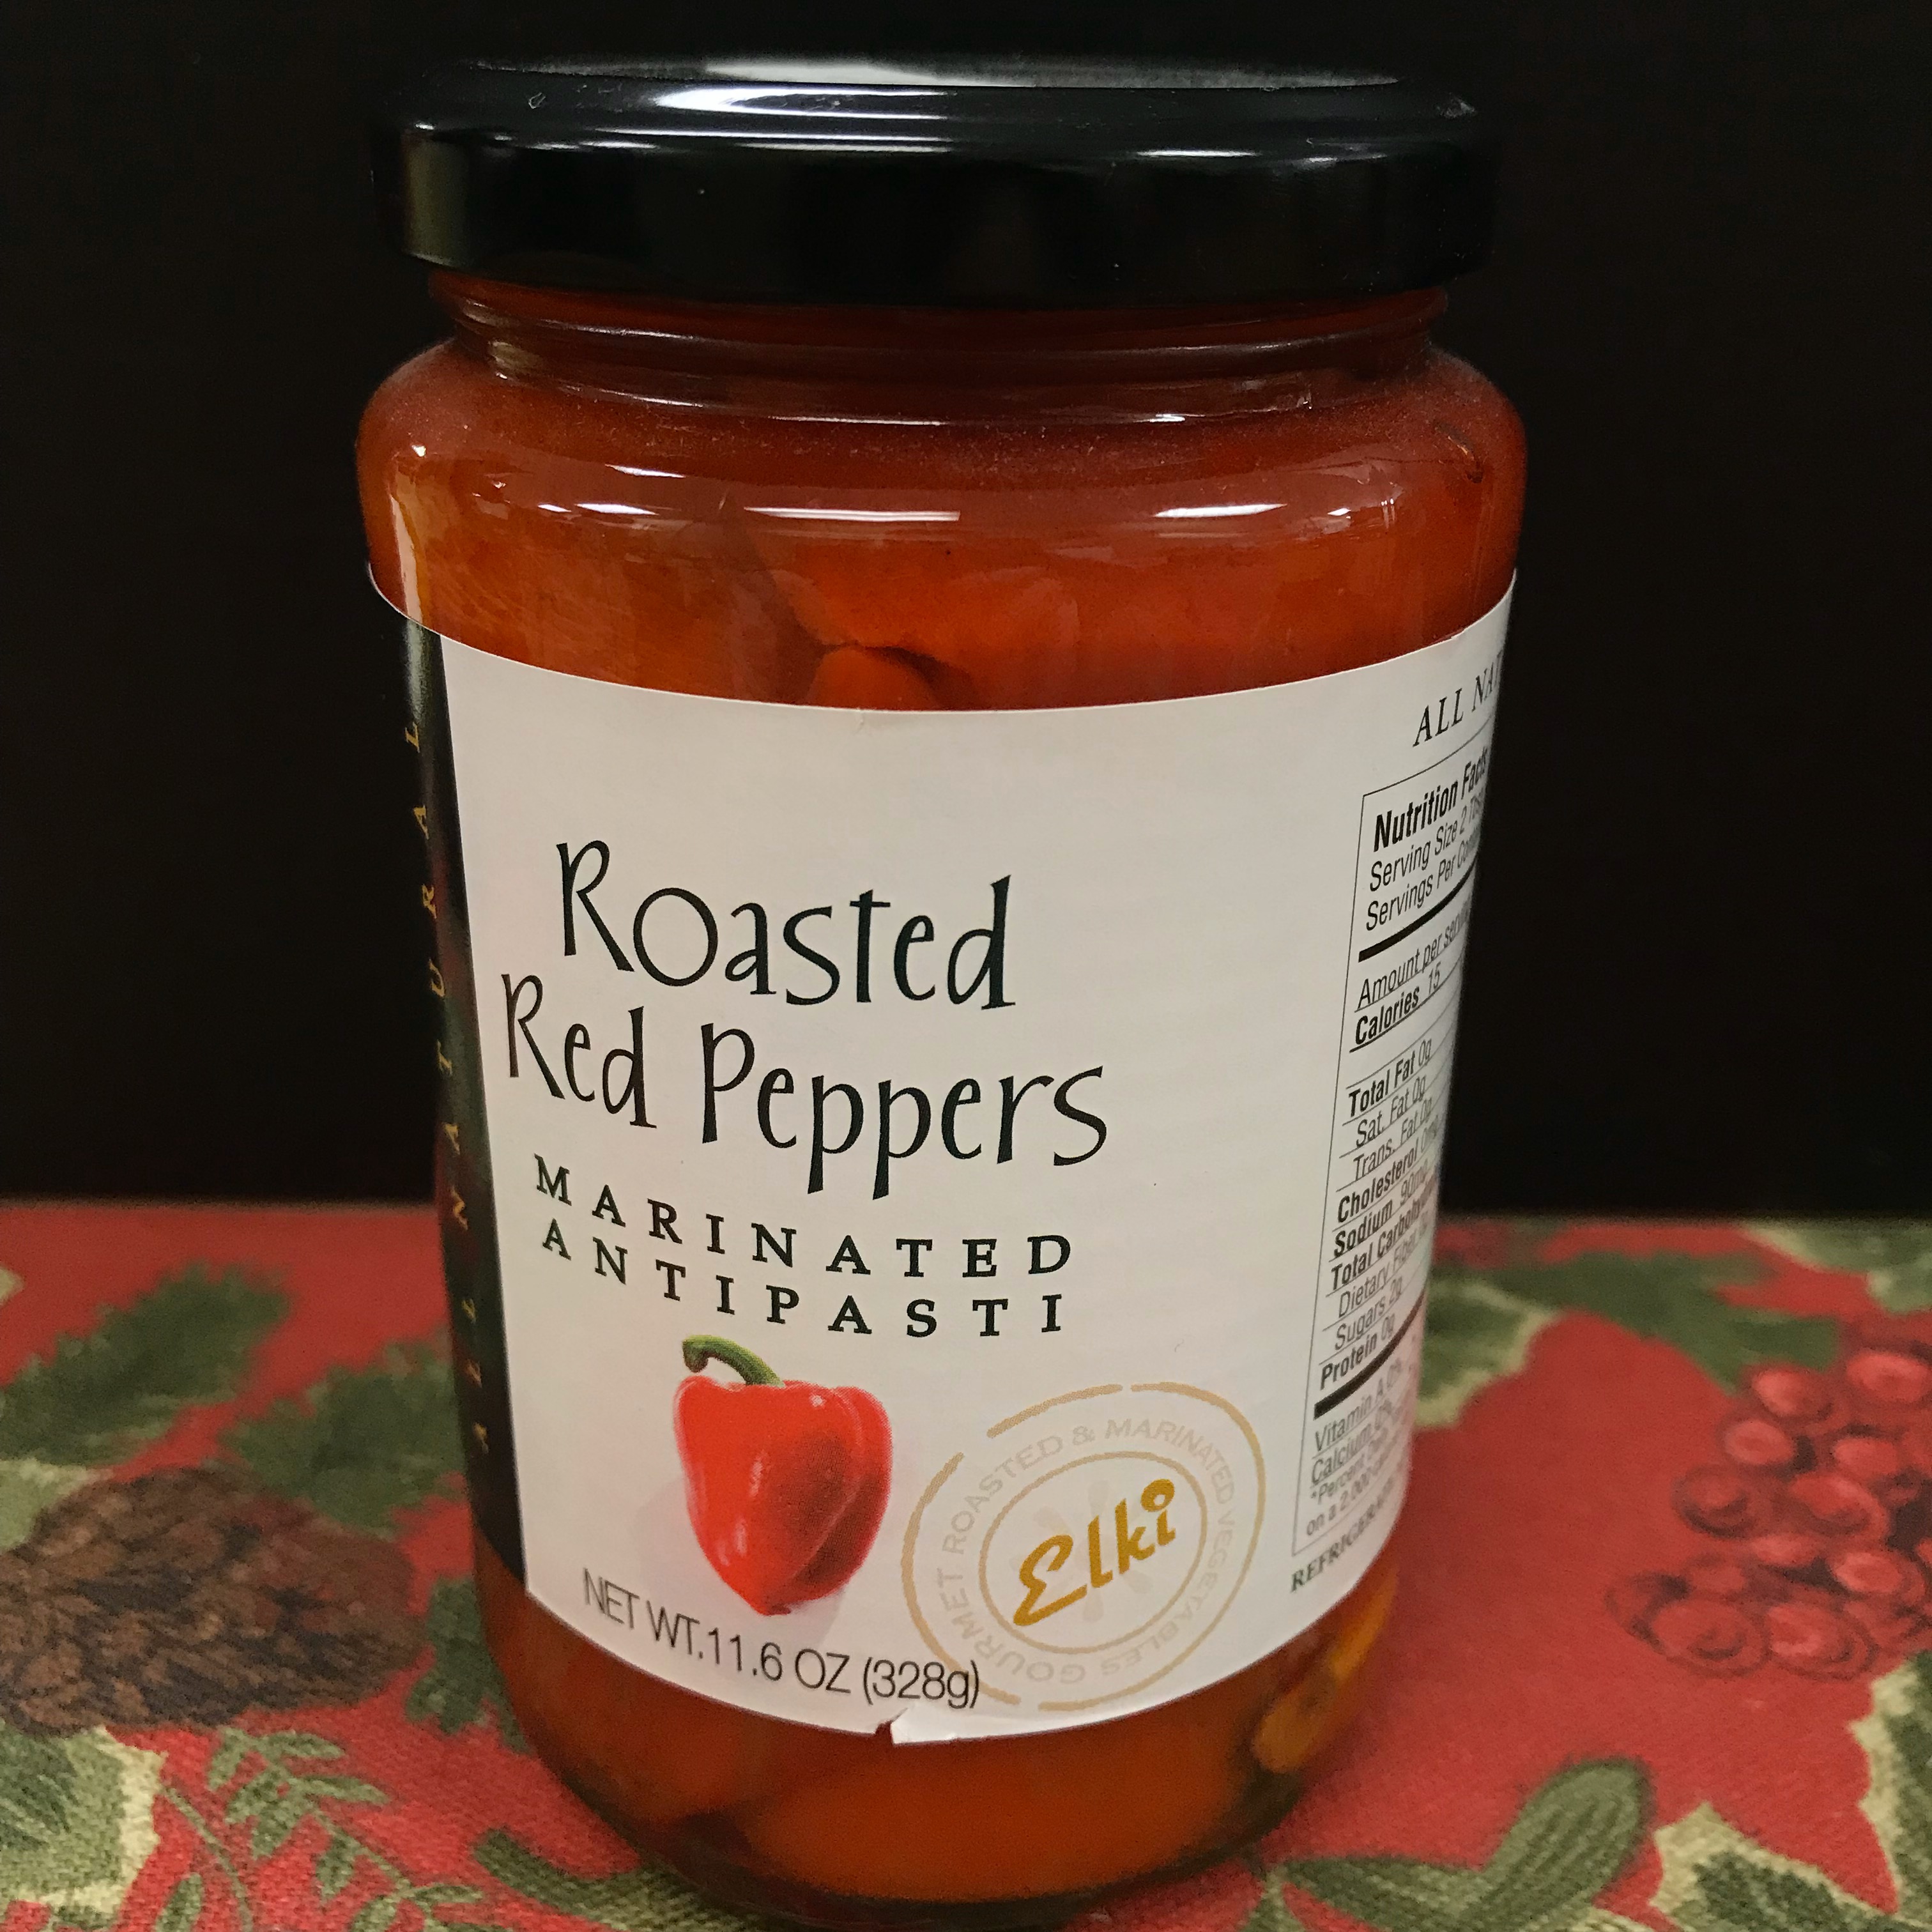 Roasted Red Peppers Marinated Antipasti all natural 12 oz - Click Image to Close